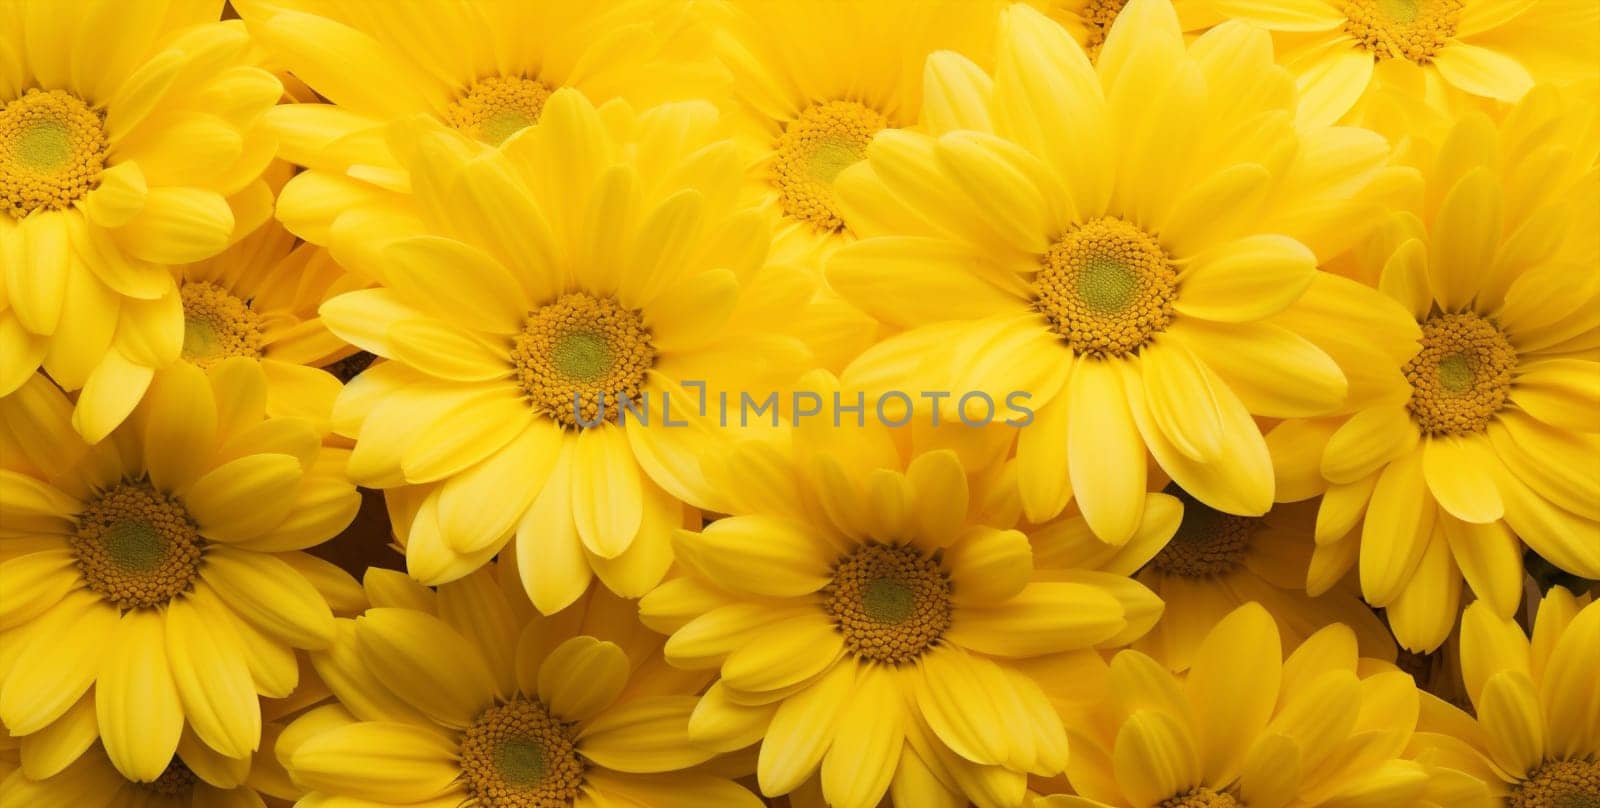 Bloom blossom up close bright group yellow flower by Vichizh